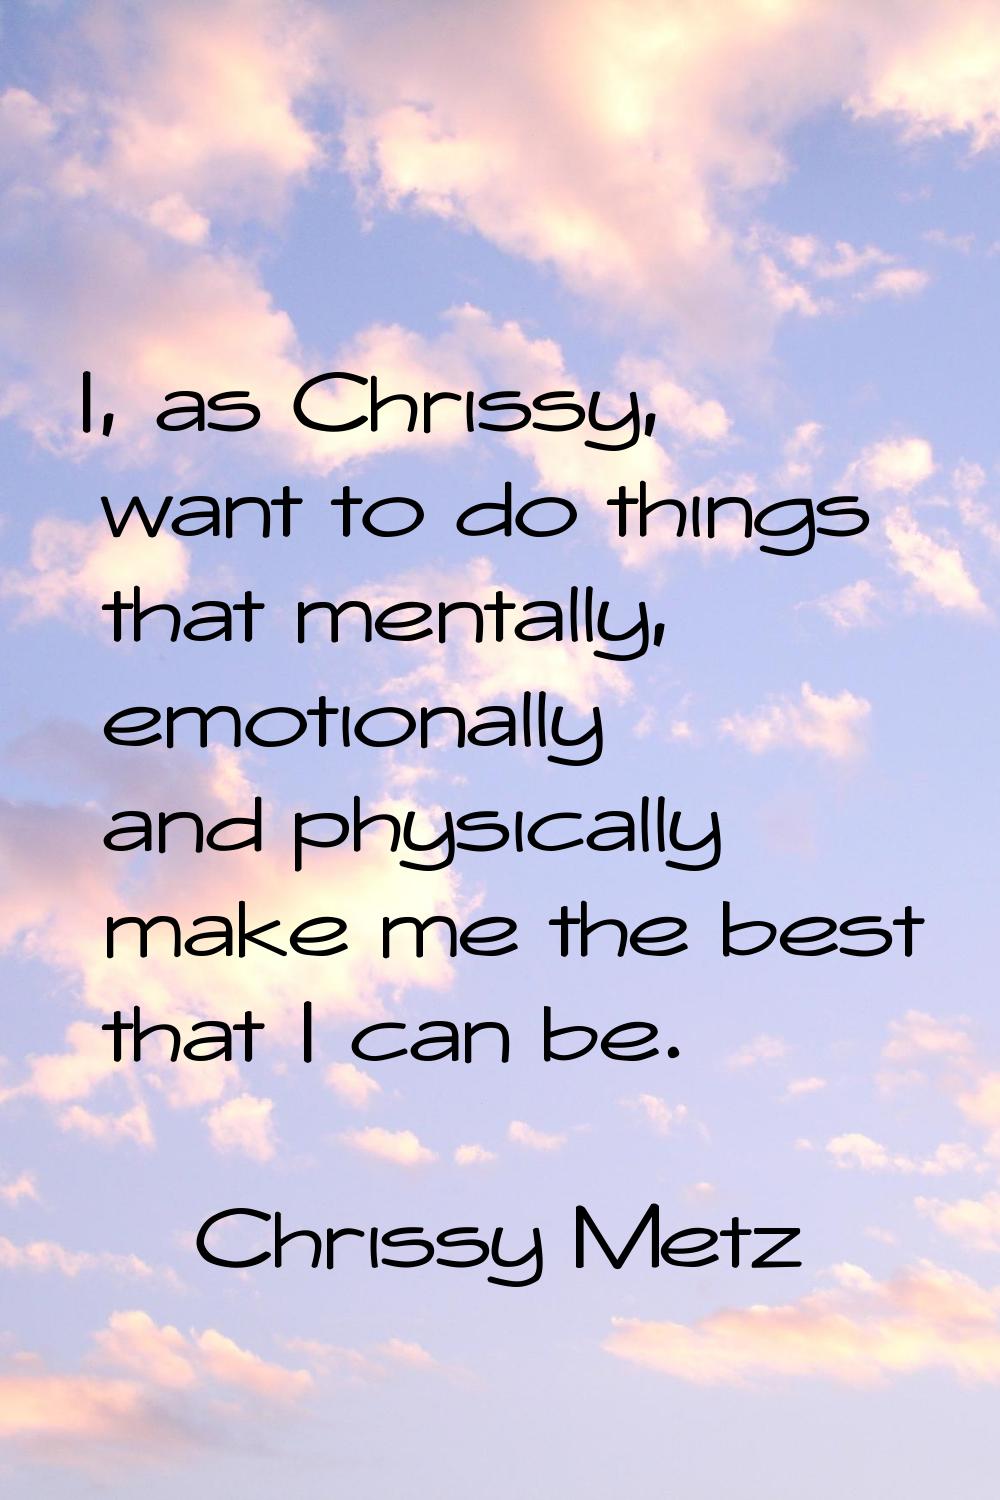 I, as Chrissy, want to do things that mentally, emotionally and physically make me the best that I 